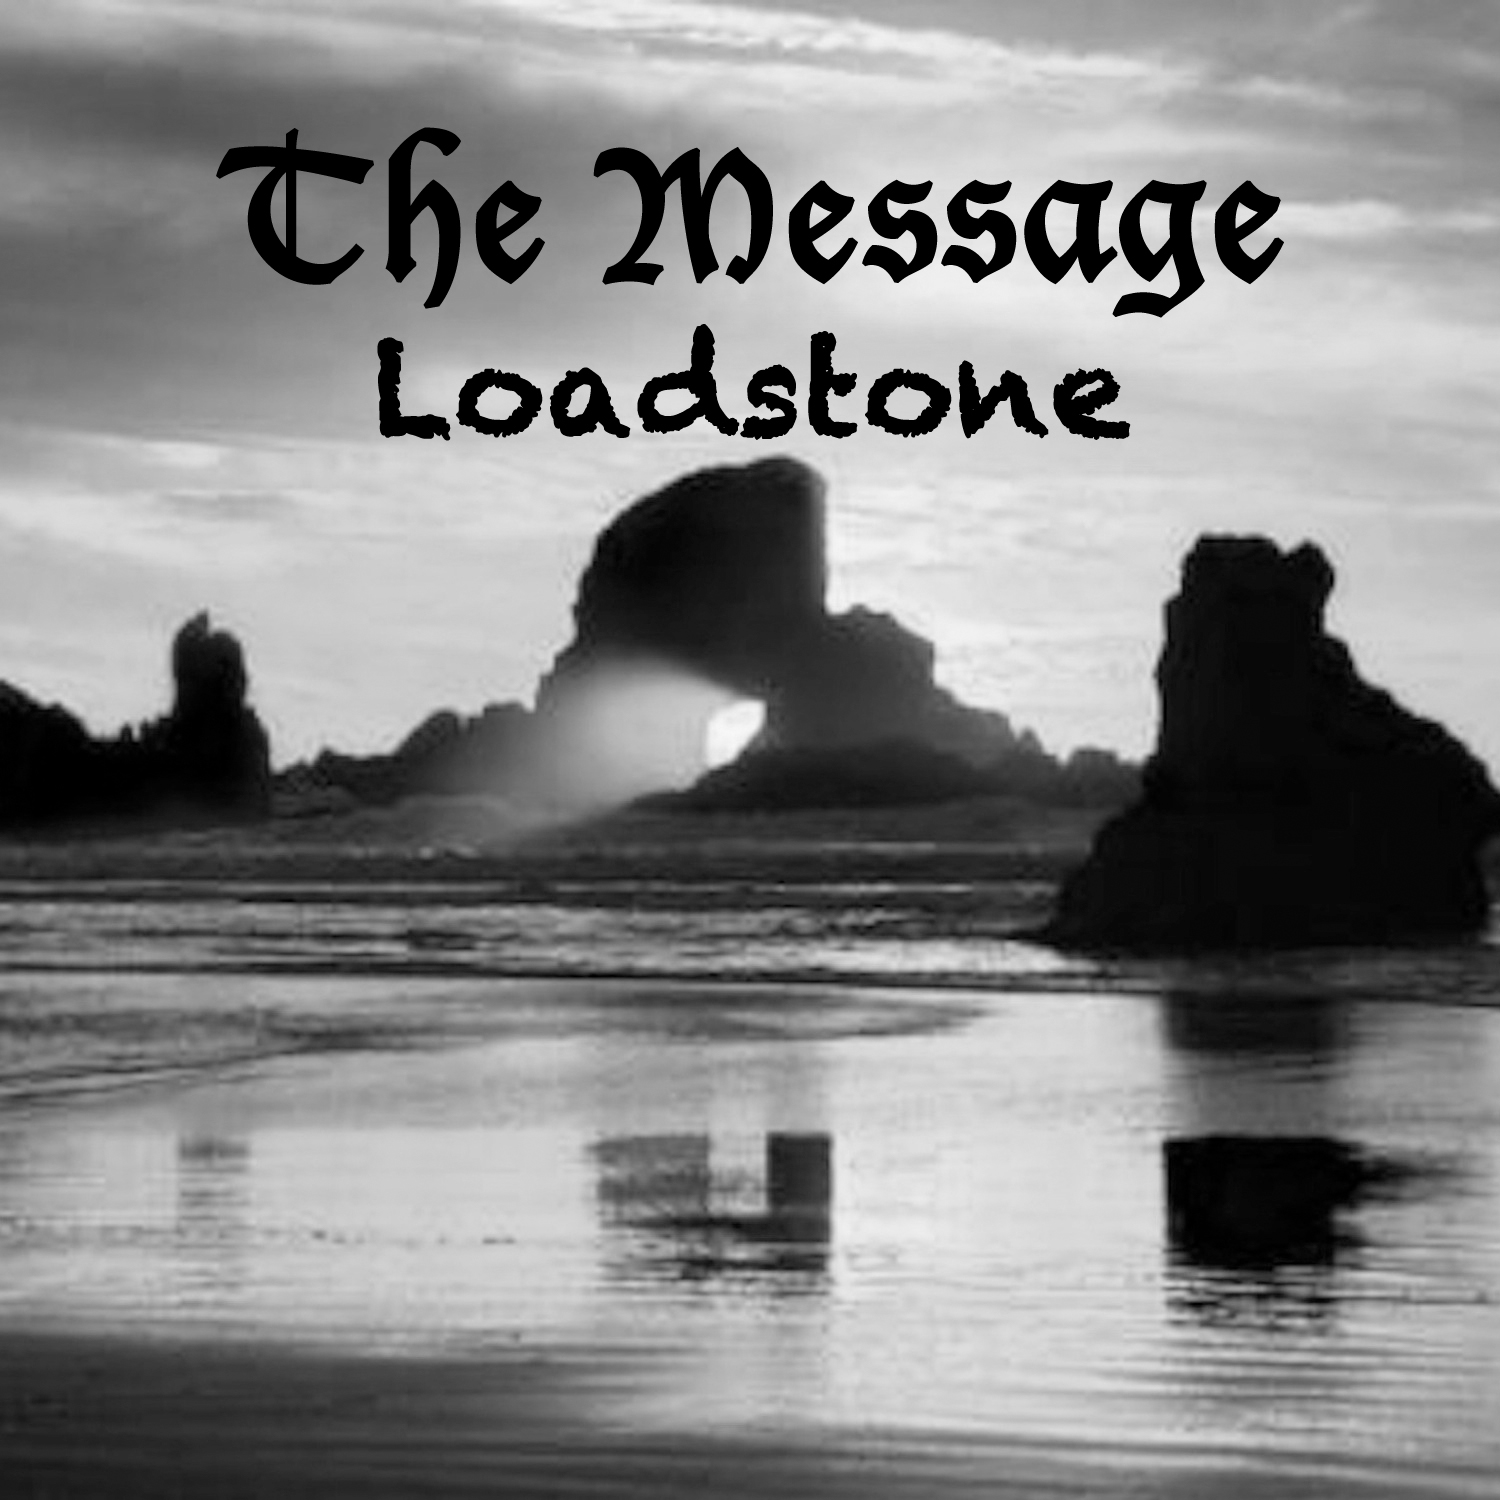 CD cover for Loadstone's The Message